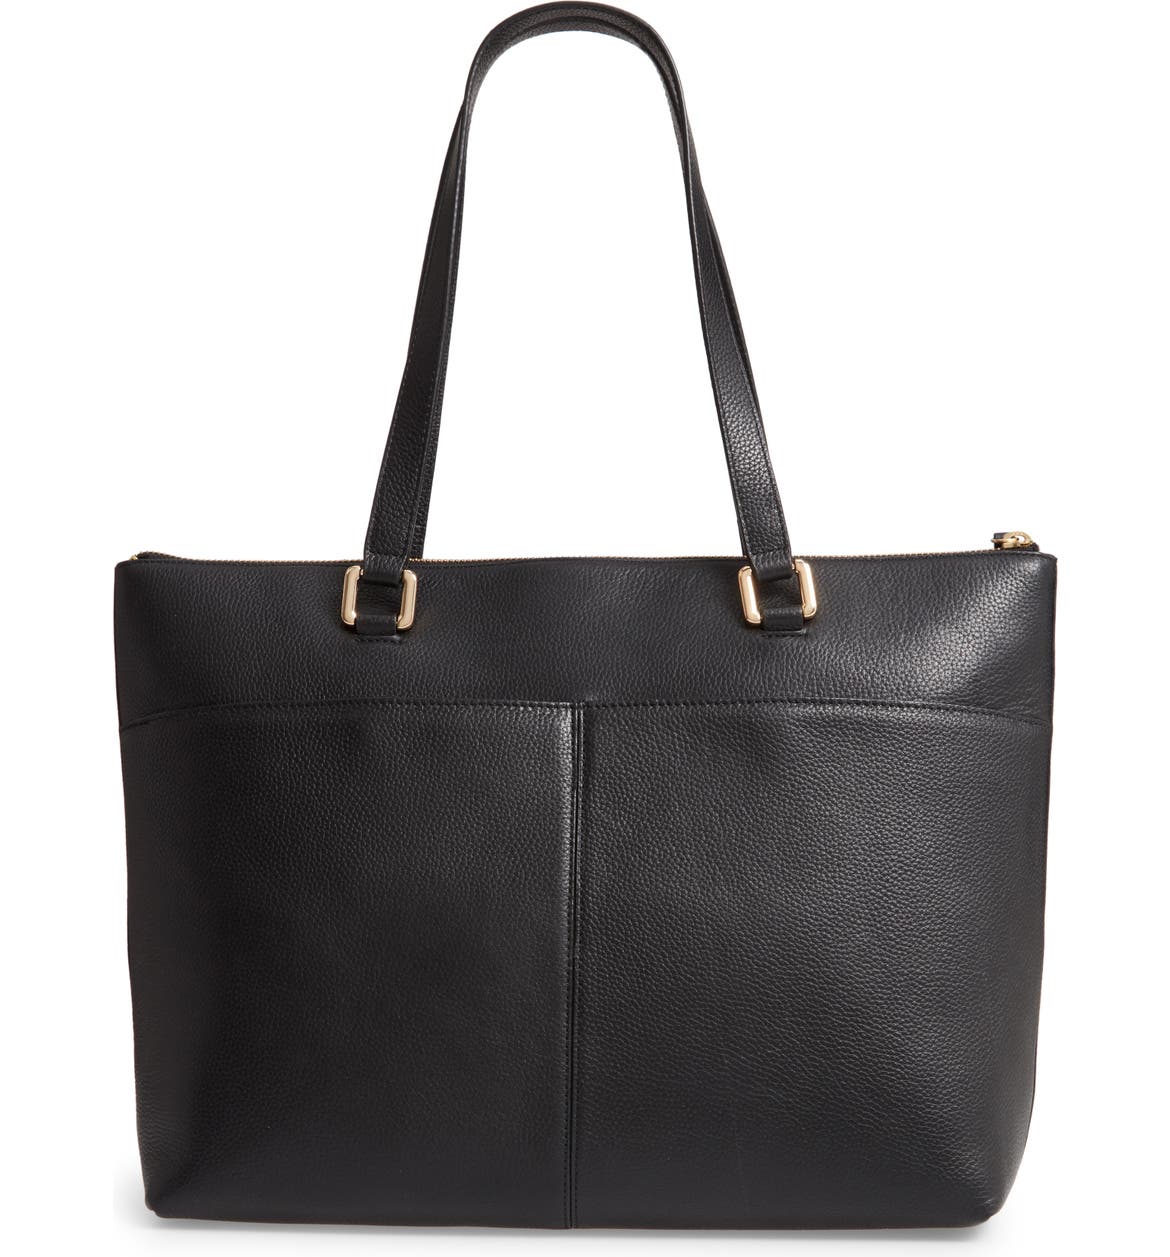 Nordstrom Lexa Pebbled Leather Tote | Nordstrom